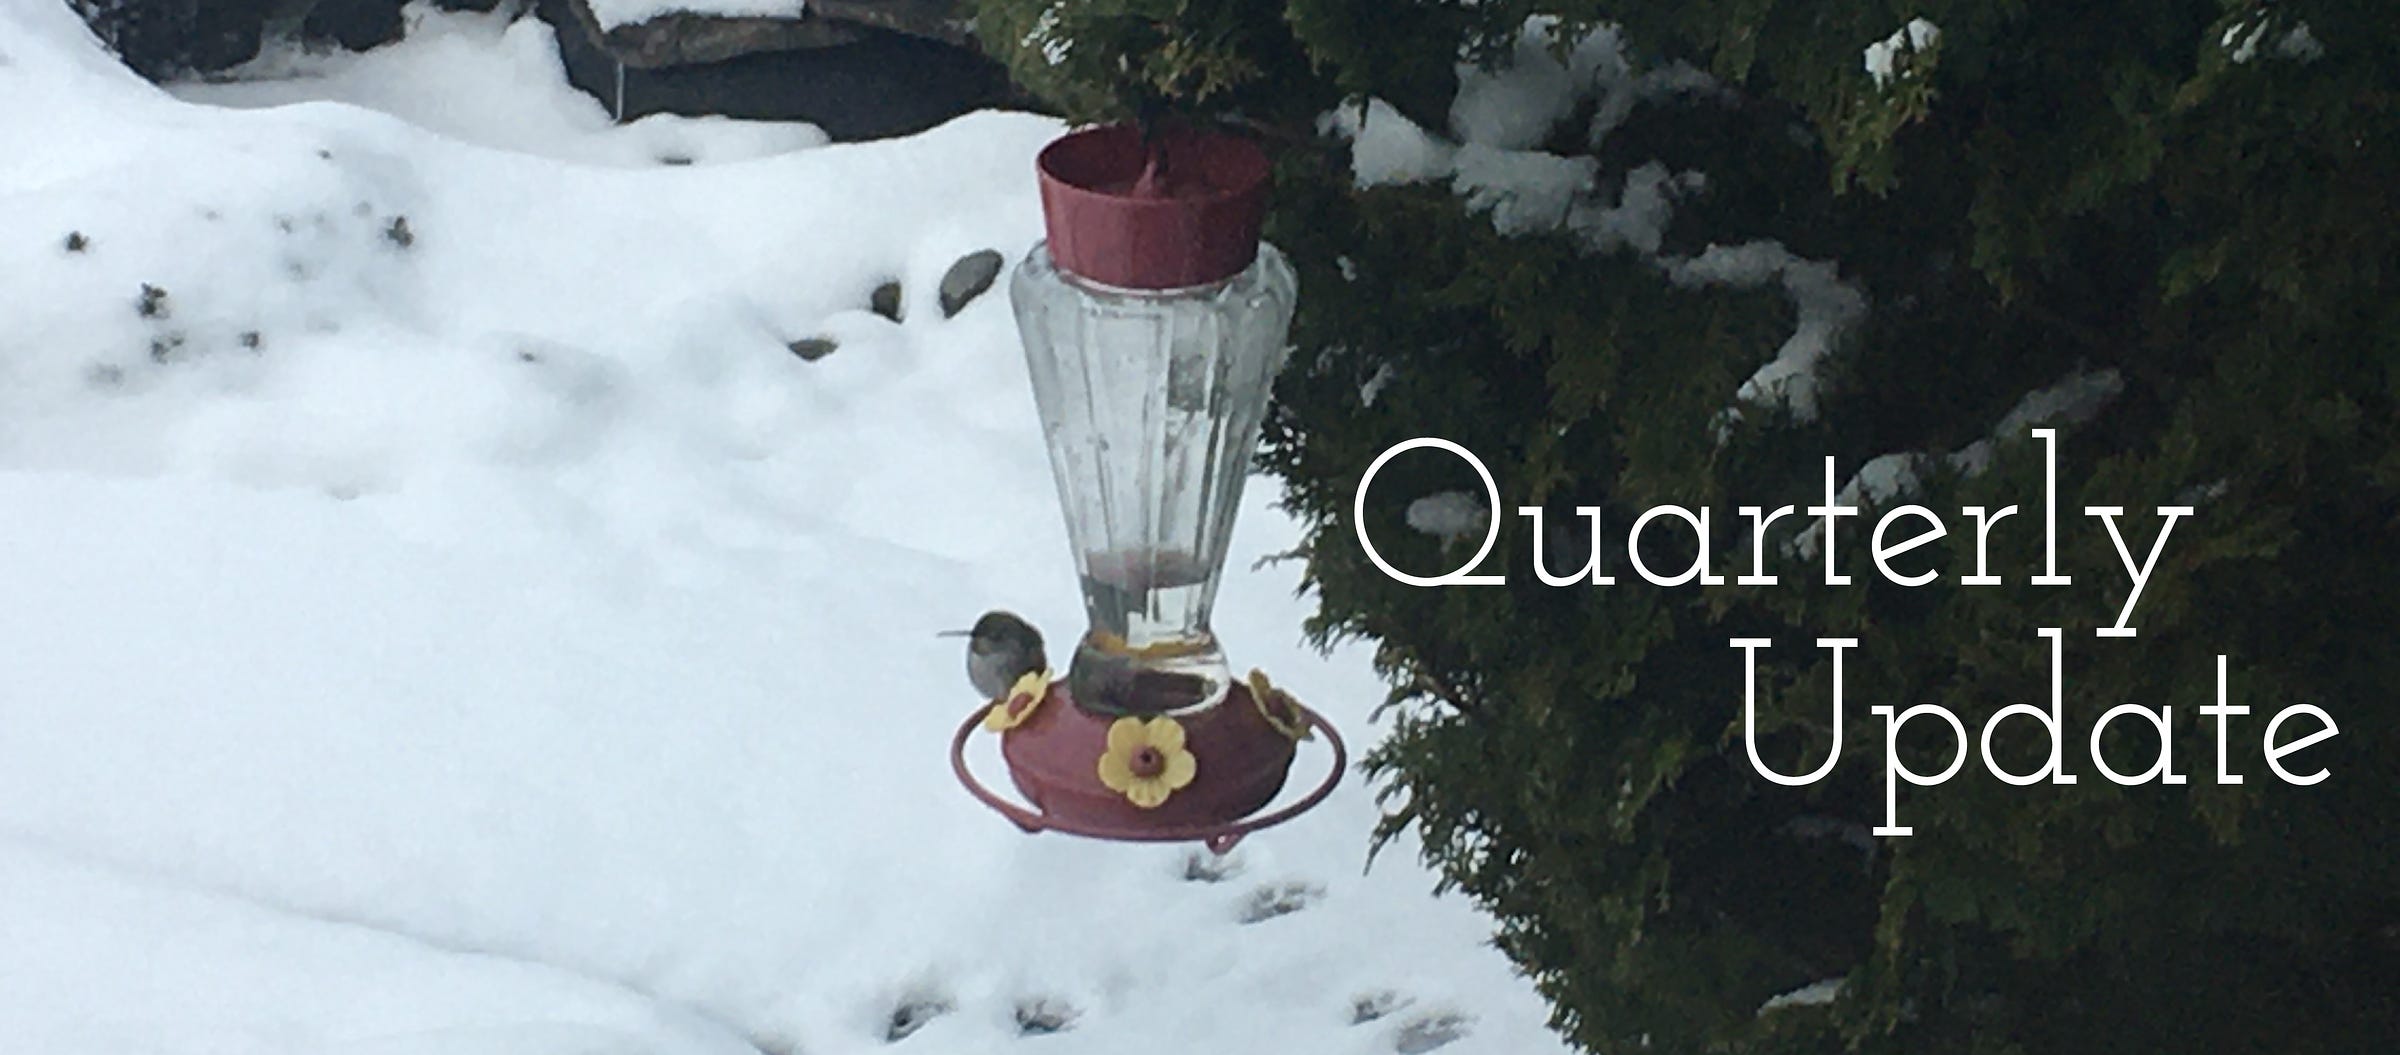 Photo of a fluffed up little hummingborb sitting on a feeder hanging from a bushy tree after a heavy snowfall